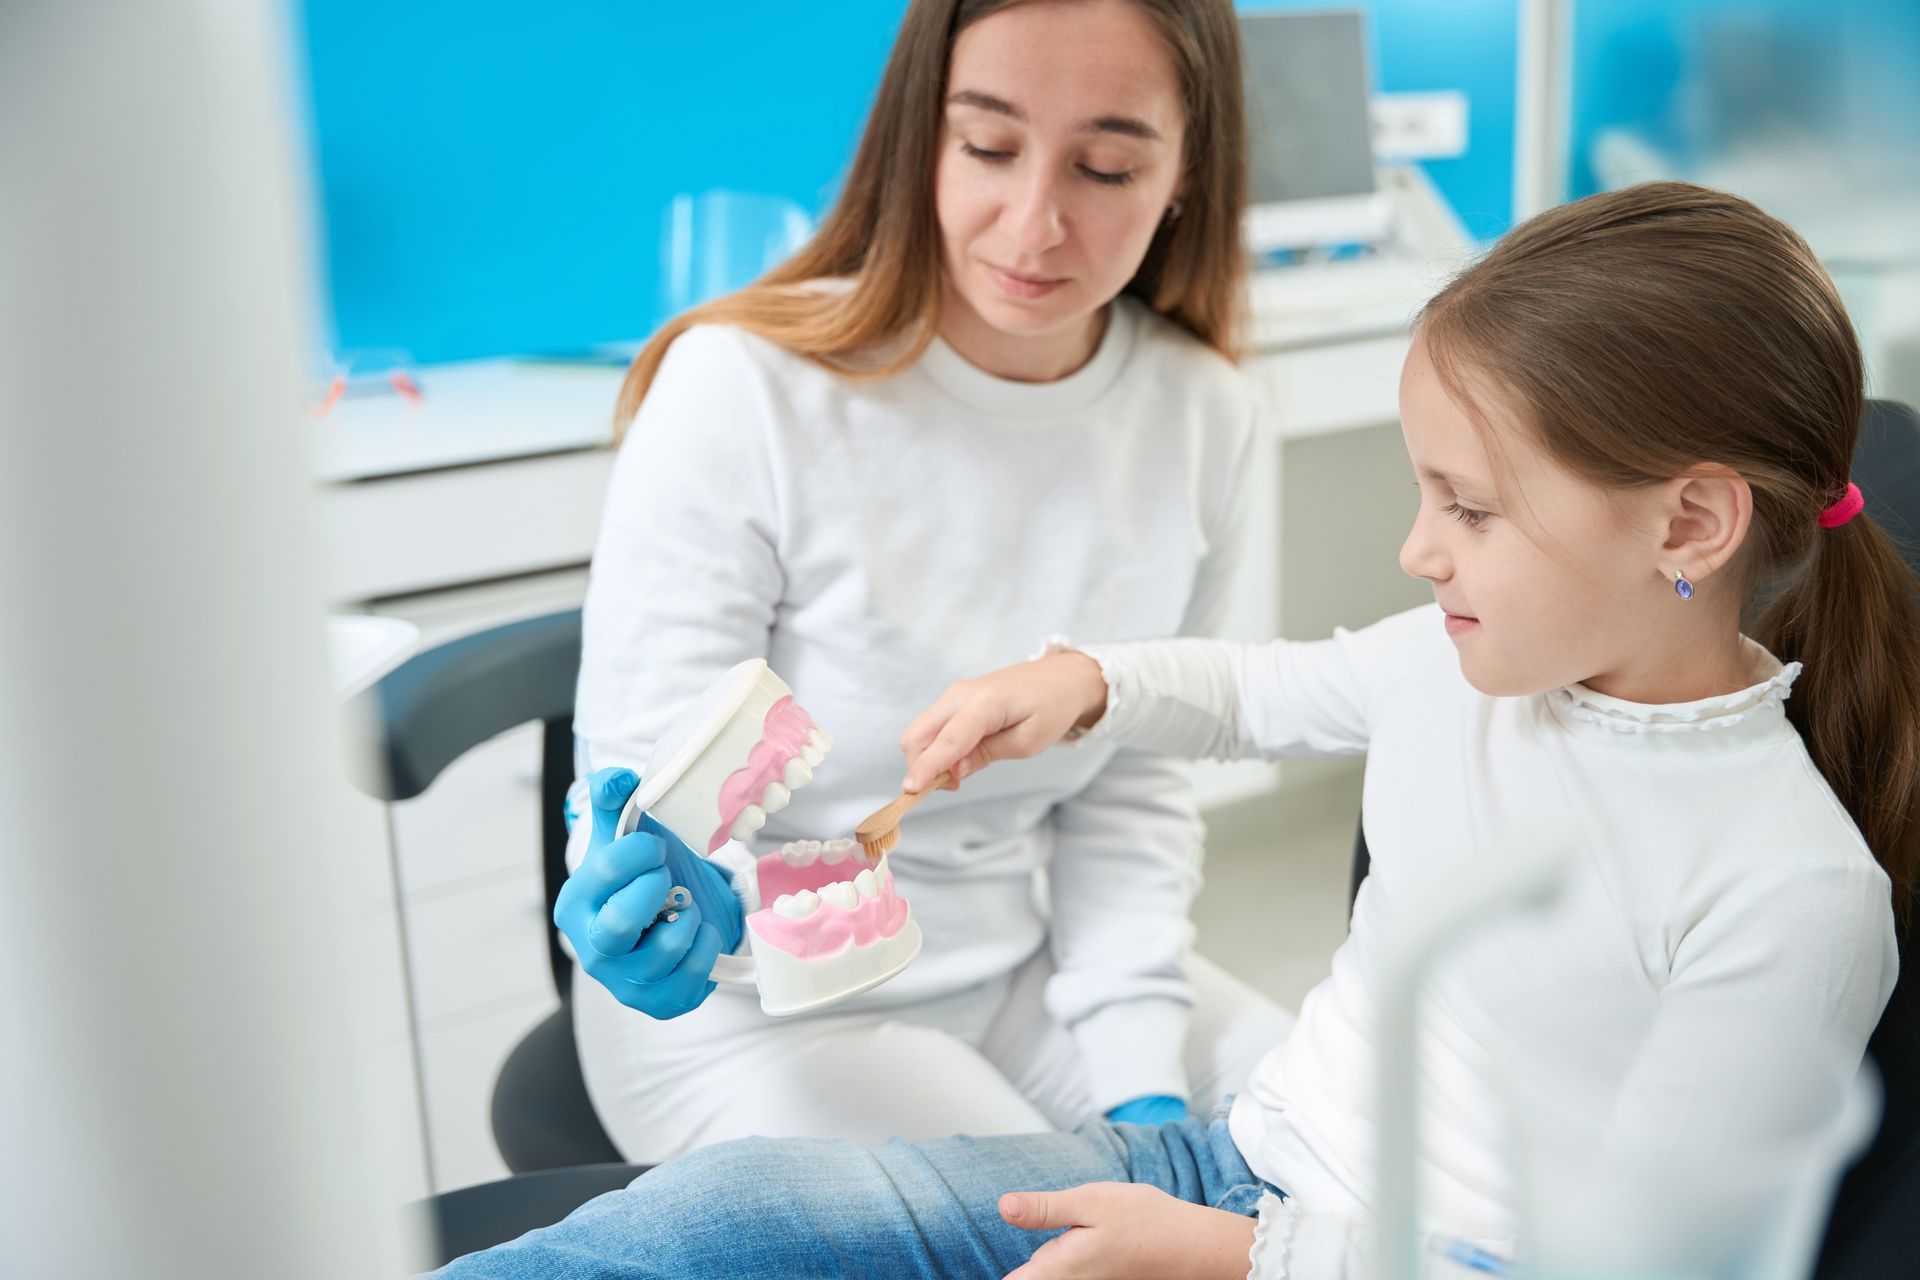 child brushing the teeth of a model at the dentist office because she has group dental insurance through her parents employer